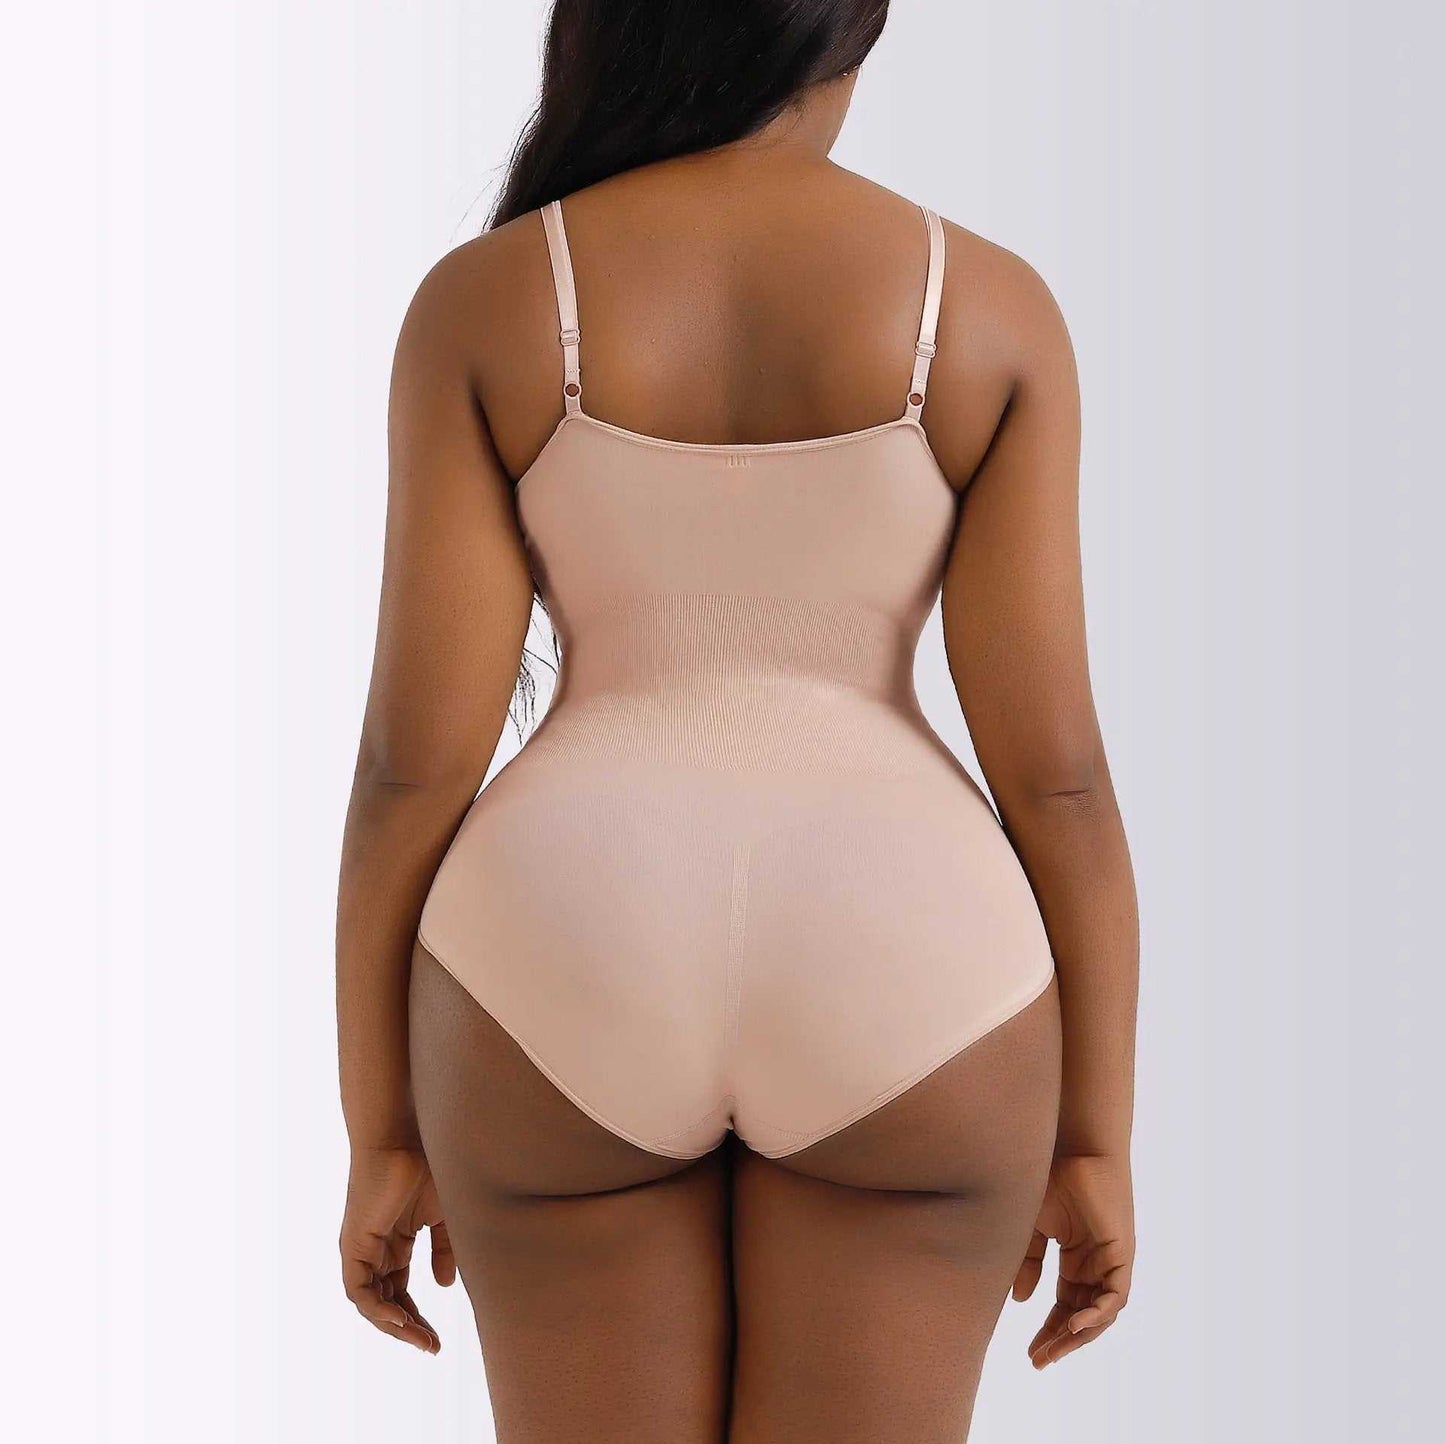 Slimming Body Shaper with Butt Lifting and Abdomen Control for Women - Beauty Bouqe